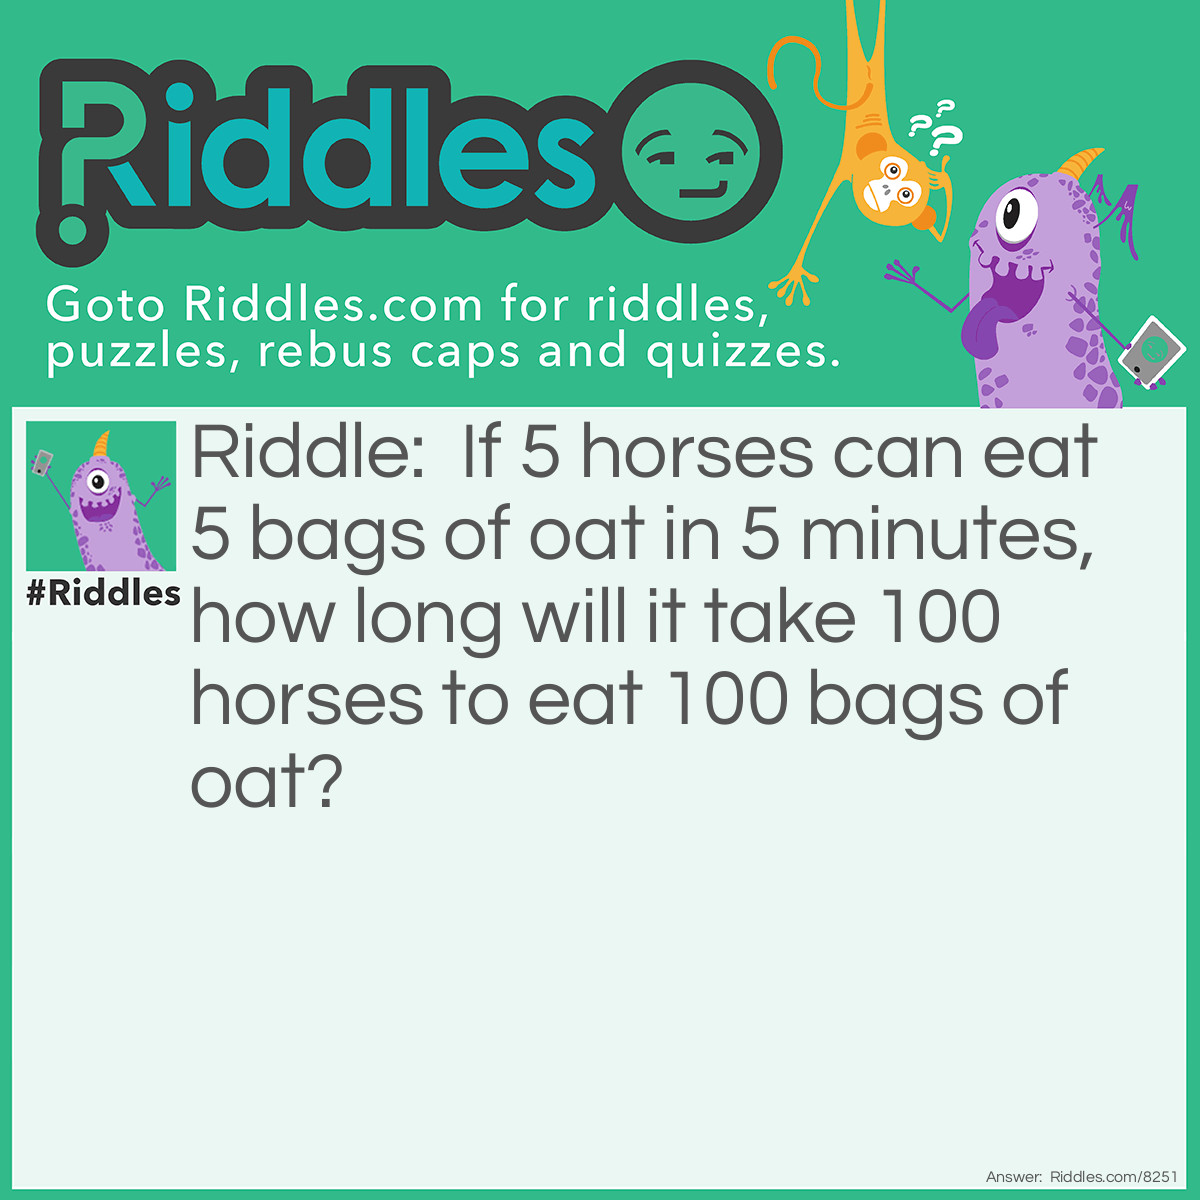 Riddle: If 5 horses can eat 5 bags of oat in 5 minutes, how long will it take 100 horses to eat 100 bags of oat? Answer: 5 minutes.